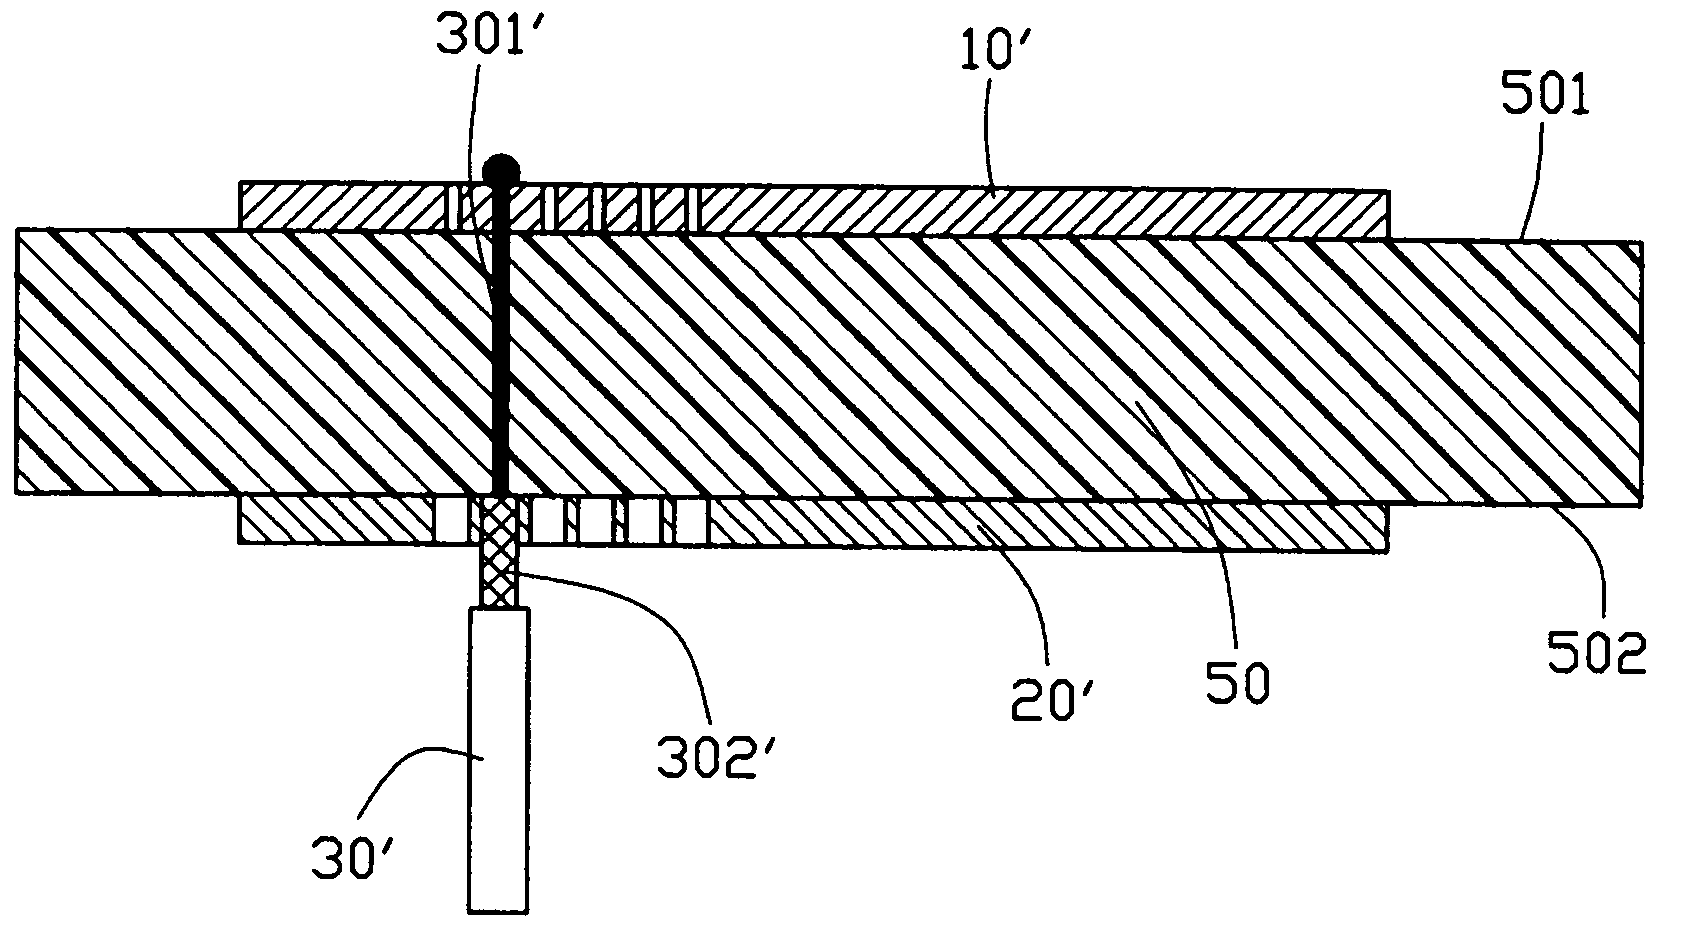 High performance dual-patch antenna with fast impedance matching holes